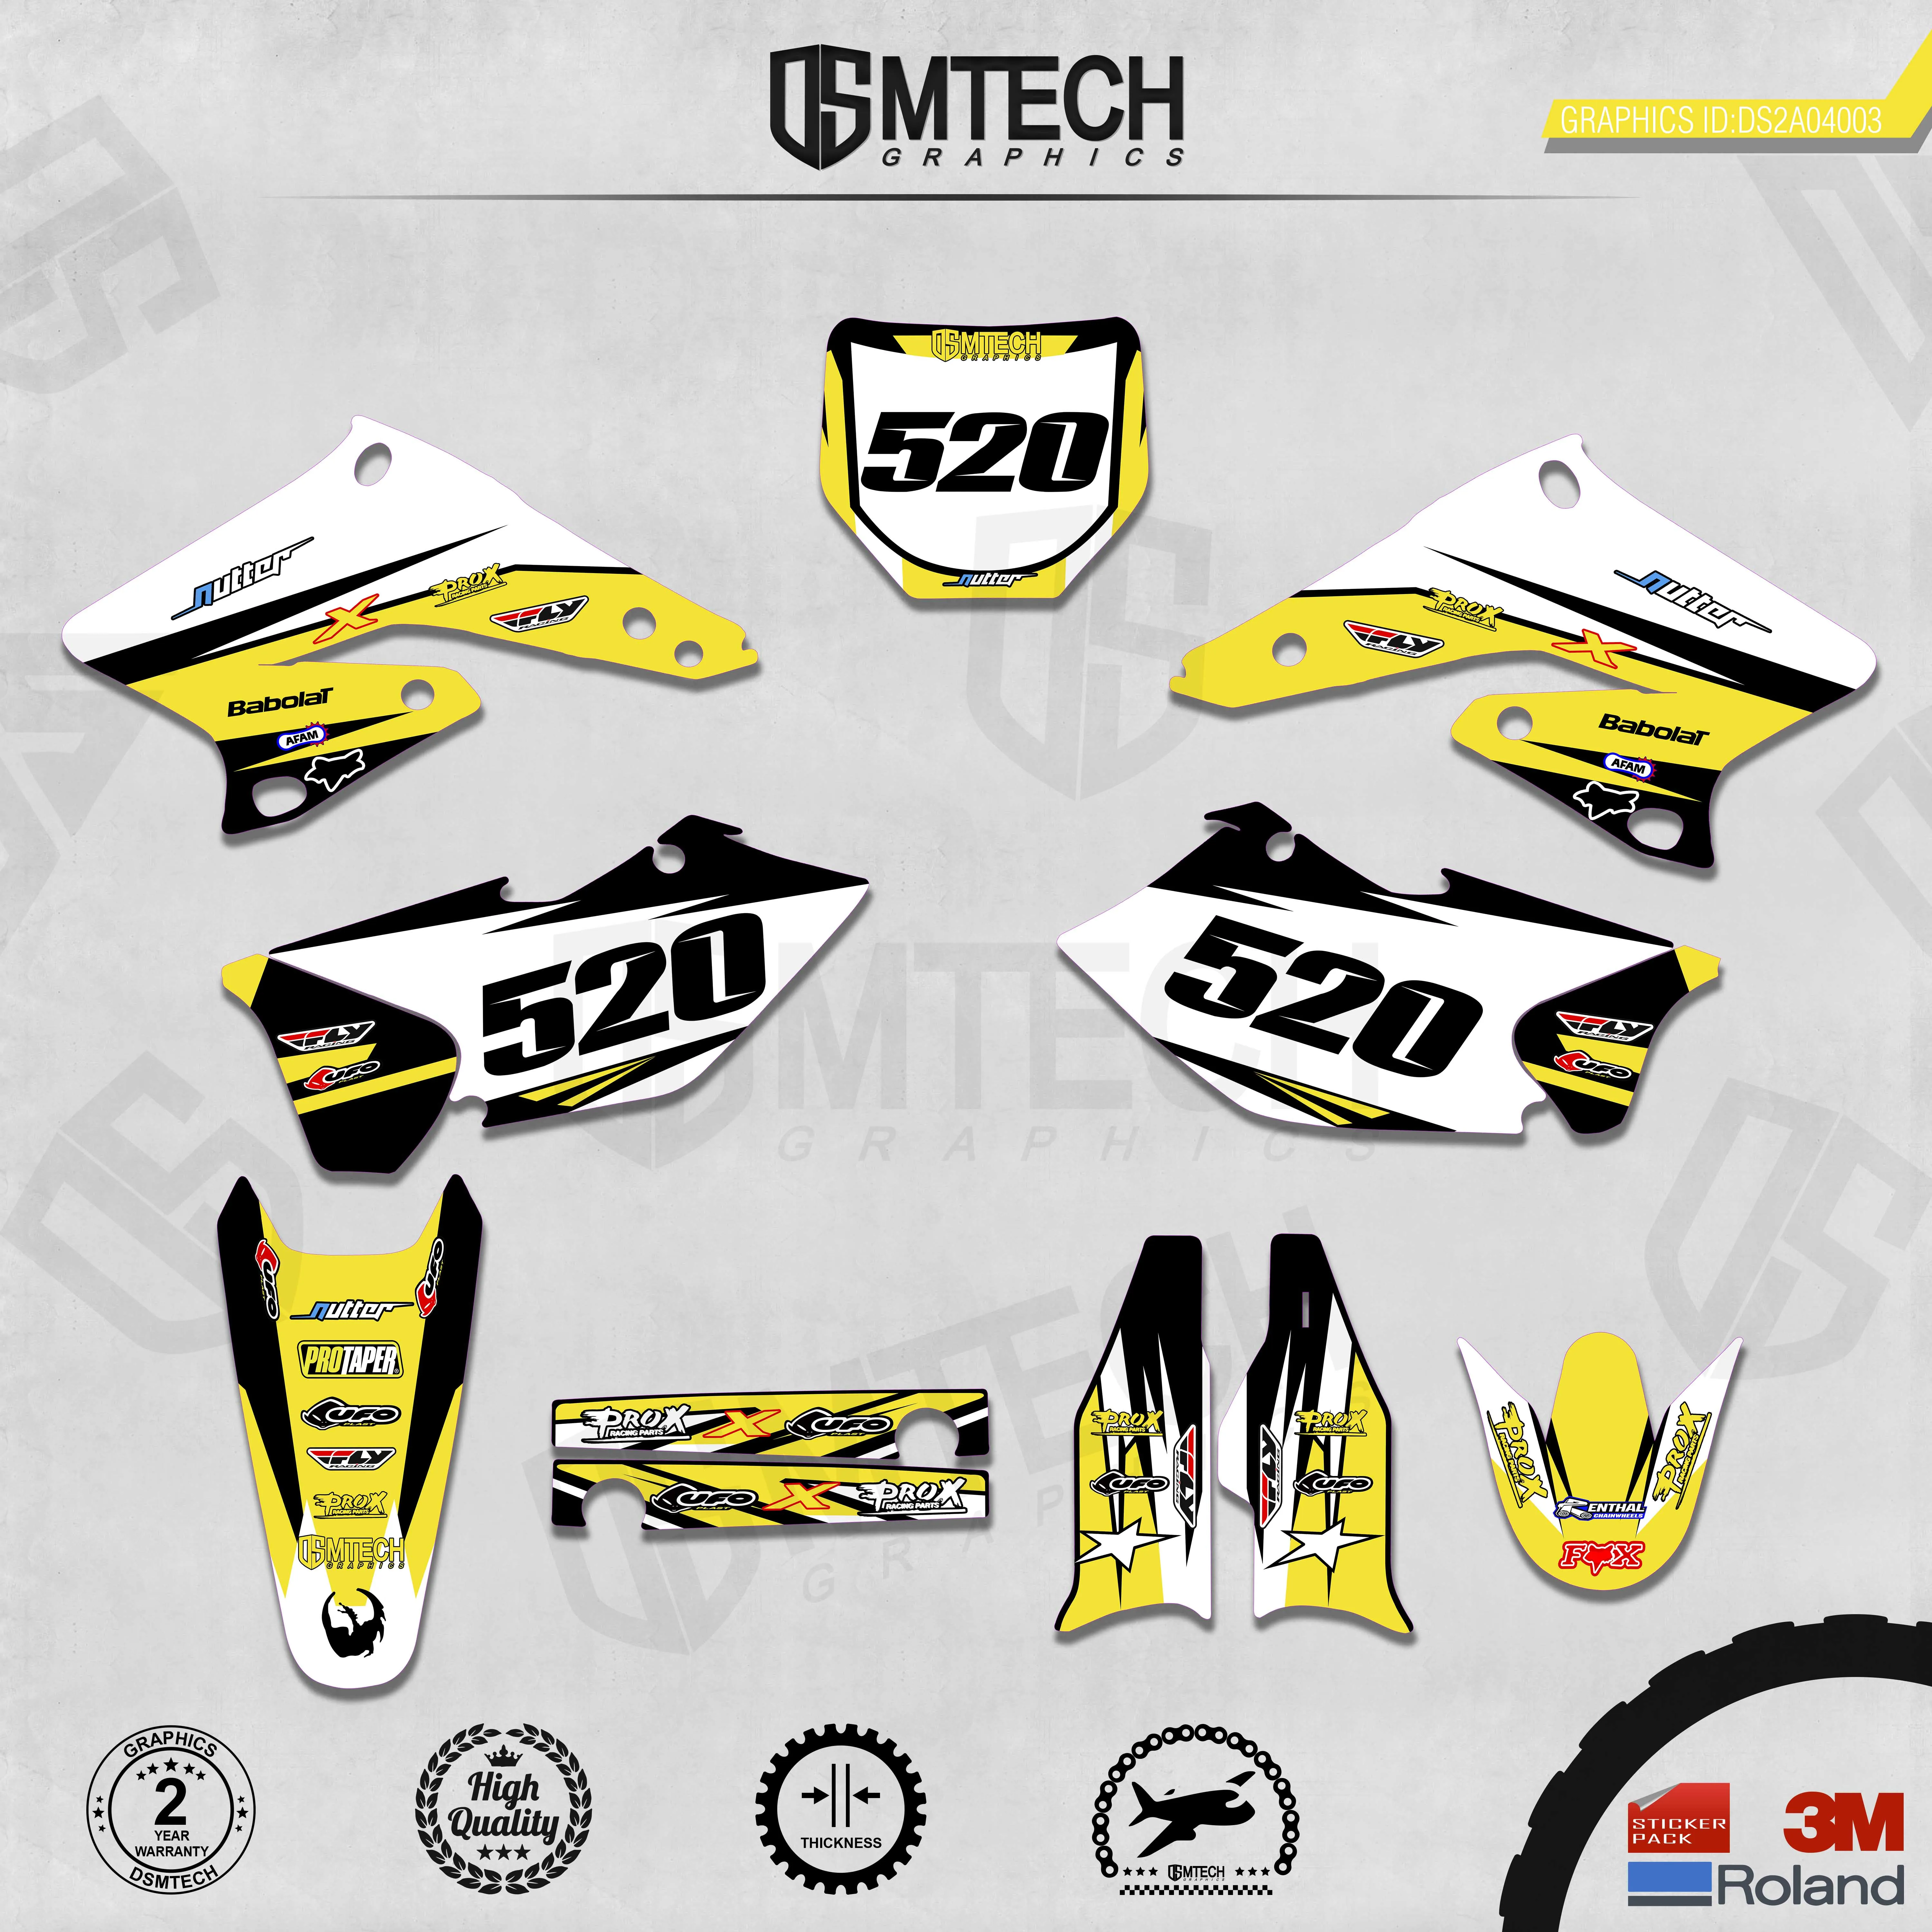 DSMTECH Customized Team Graphics Backgrounds Decals 3M Custom Stickers For 2004-2006 RMZ250  003